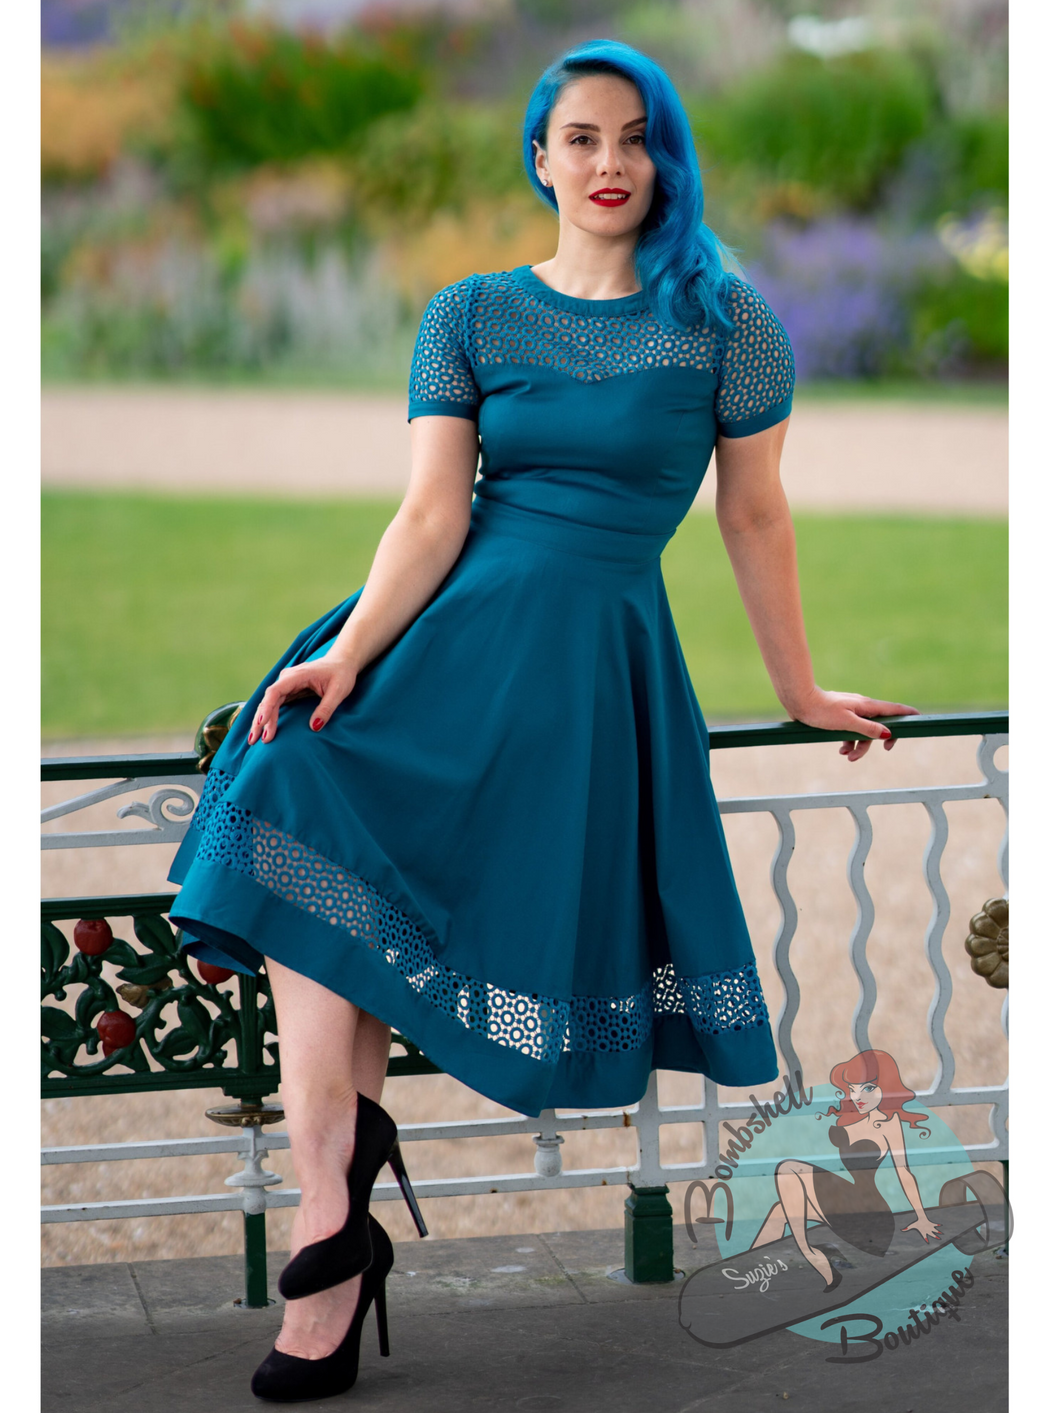 Turquoise swing dress with short sleeves and cut out lace detail on bodice and bottom of skirt. This is a classic 1950s style fit and flare dress. Perfect for bridesmaids or for a pin up holiday dress.